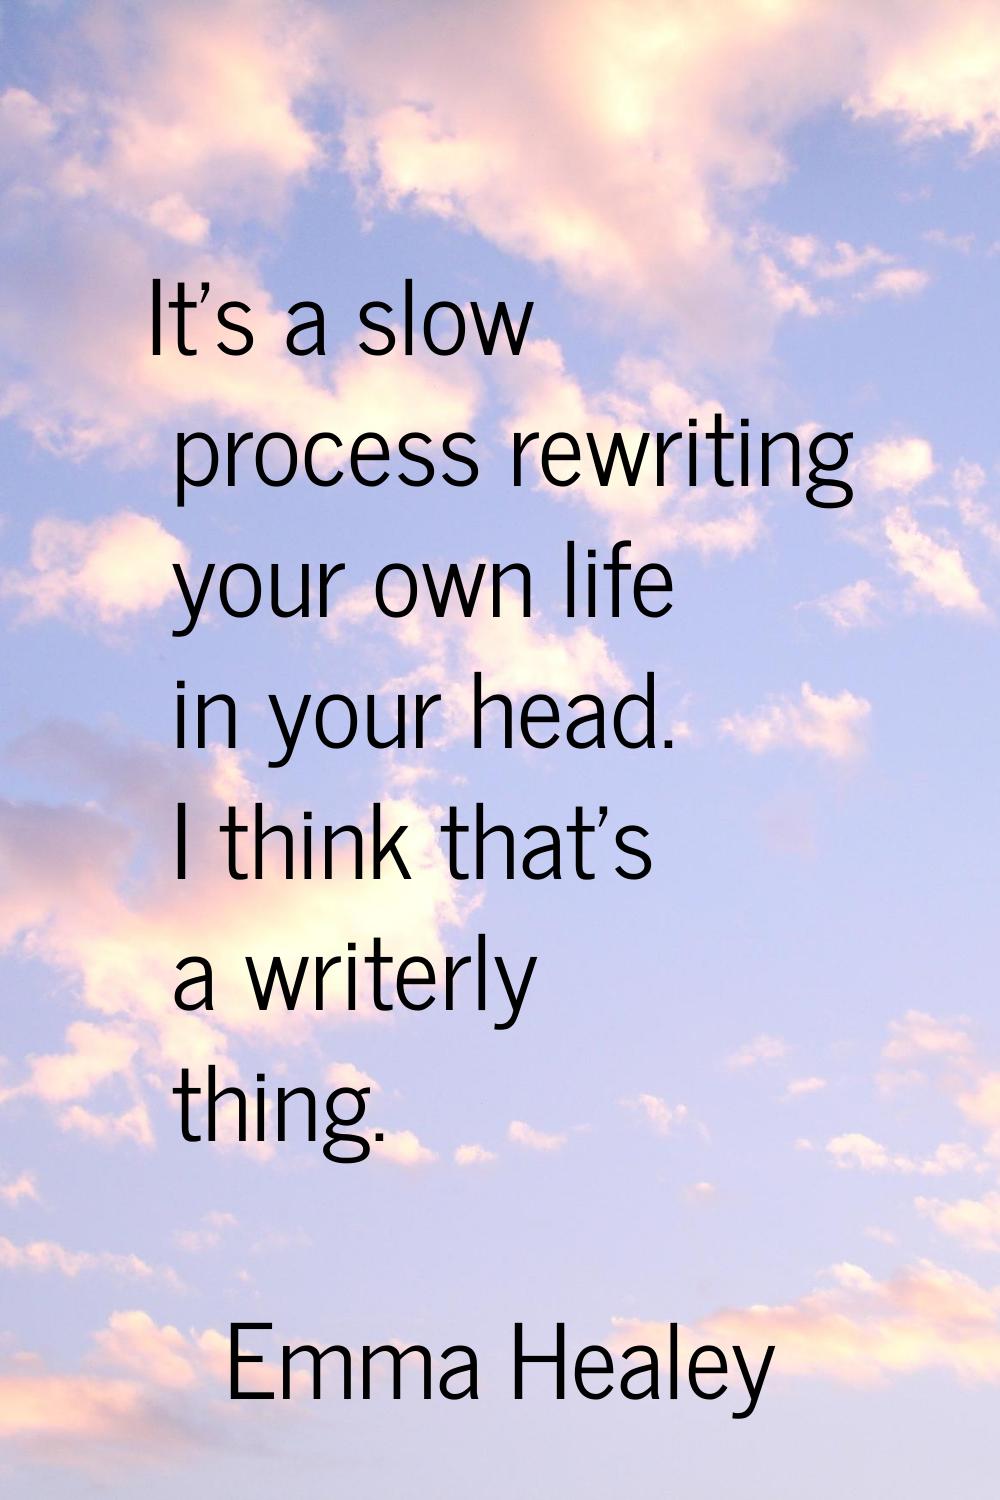 It's a slow process rewriting your own life in your head. I think that's a writerly thing.